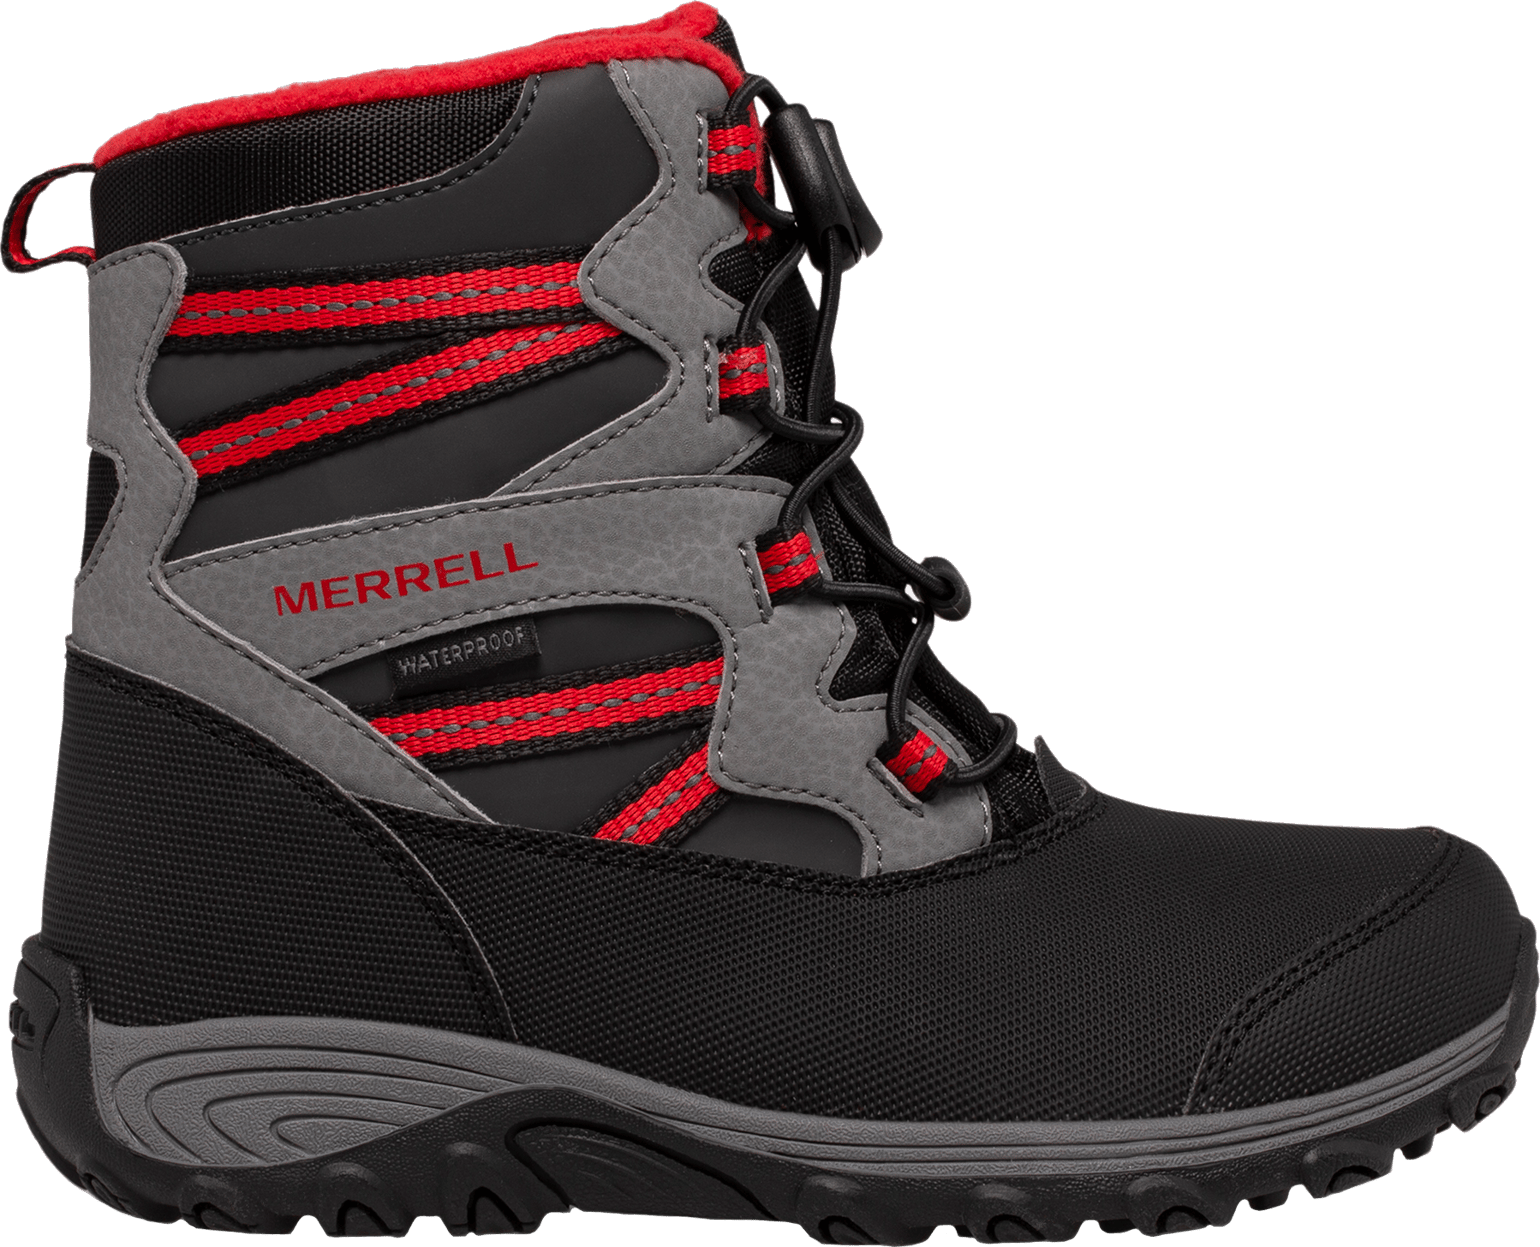 Merrell Kids' Outback Snow Boot Black/Grey/Red